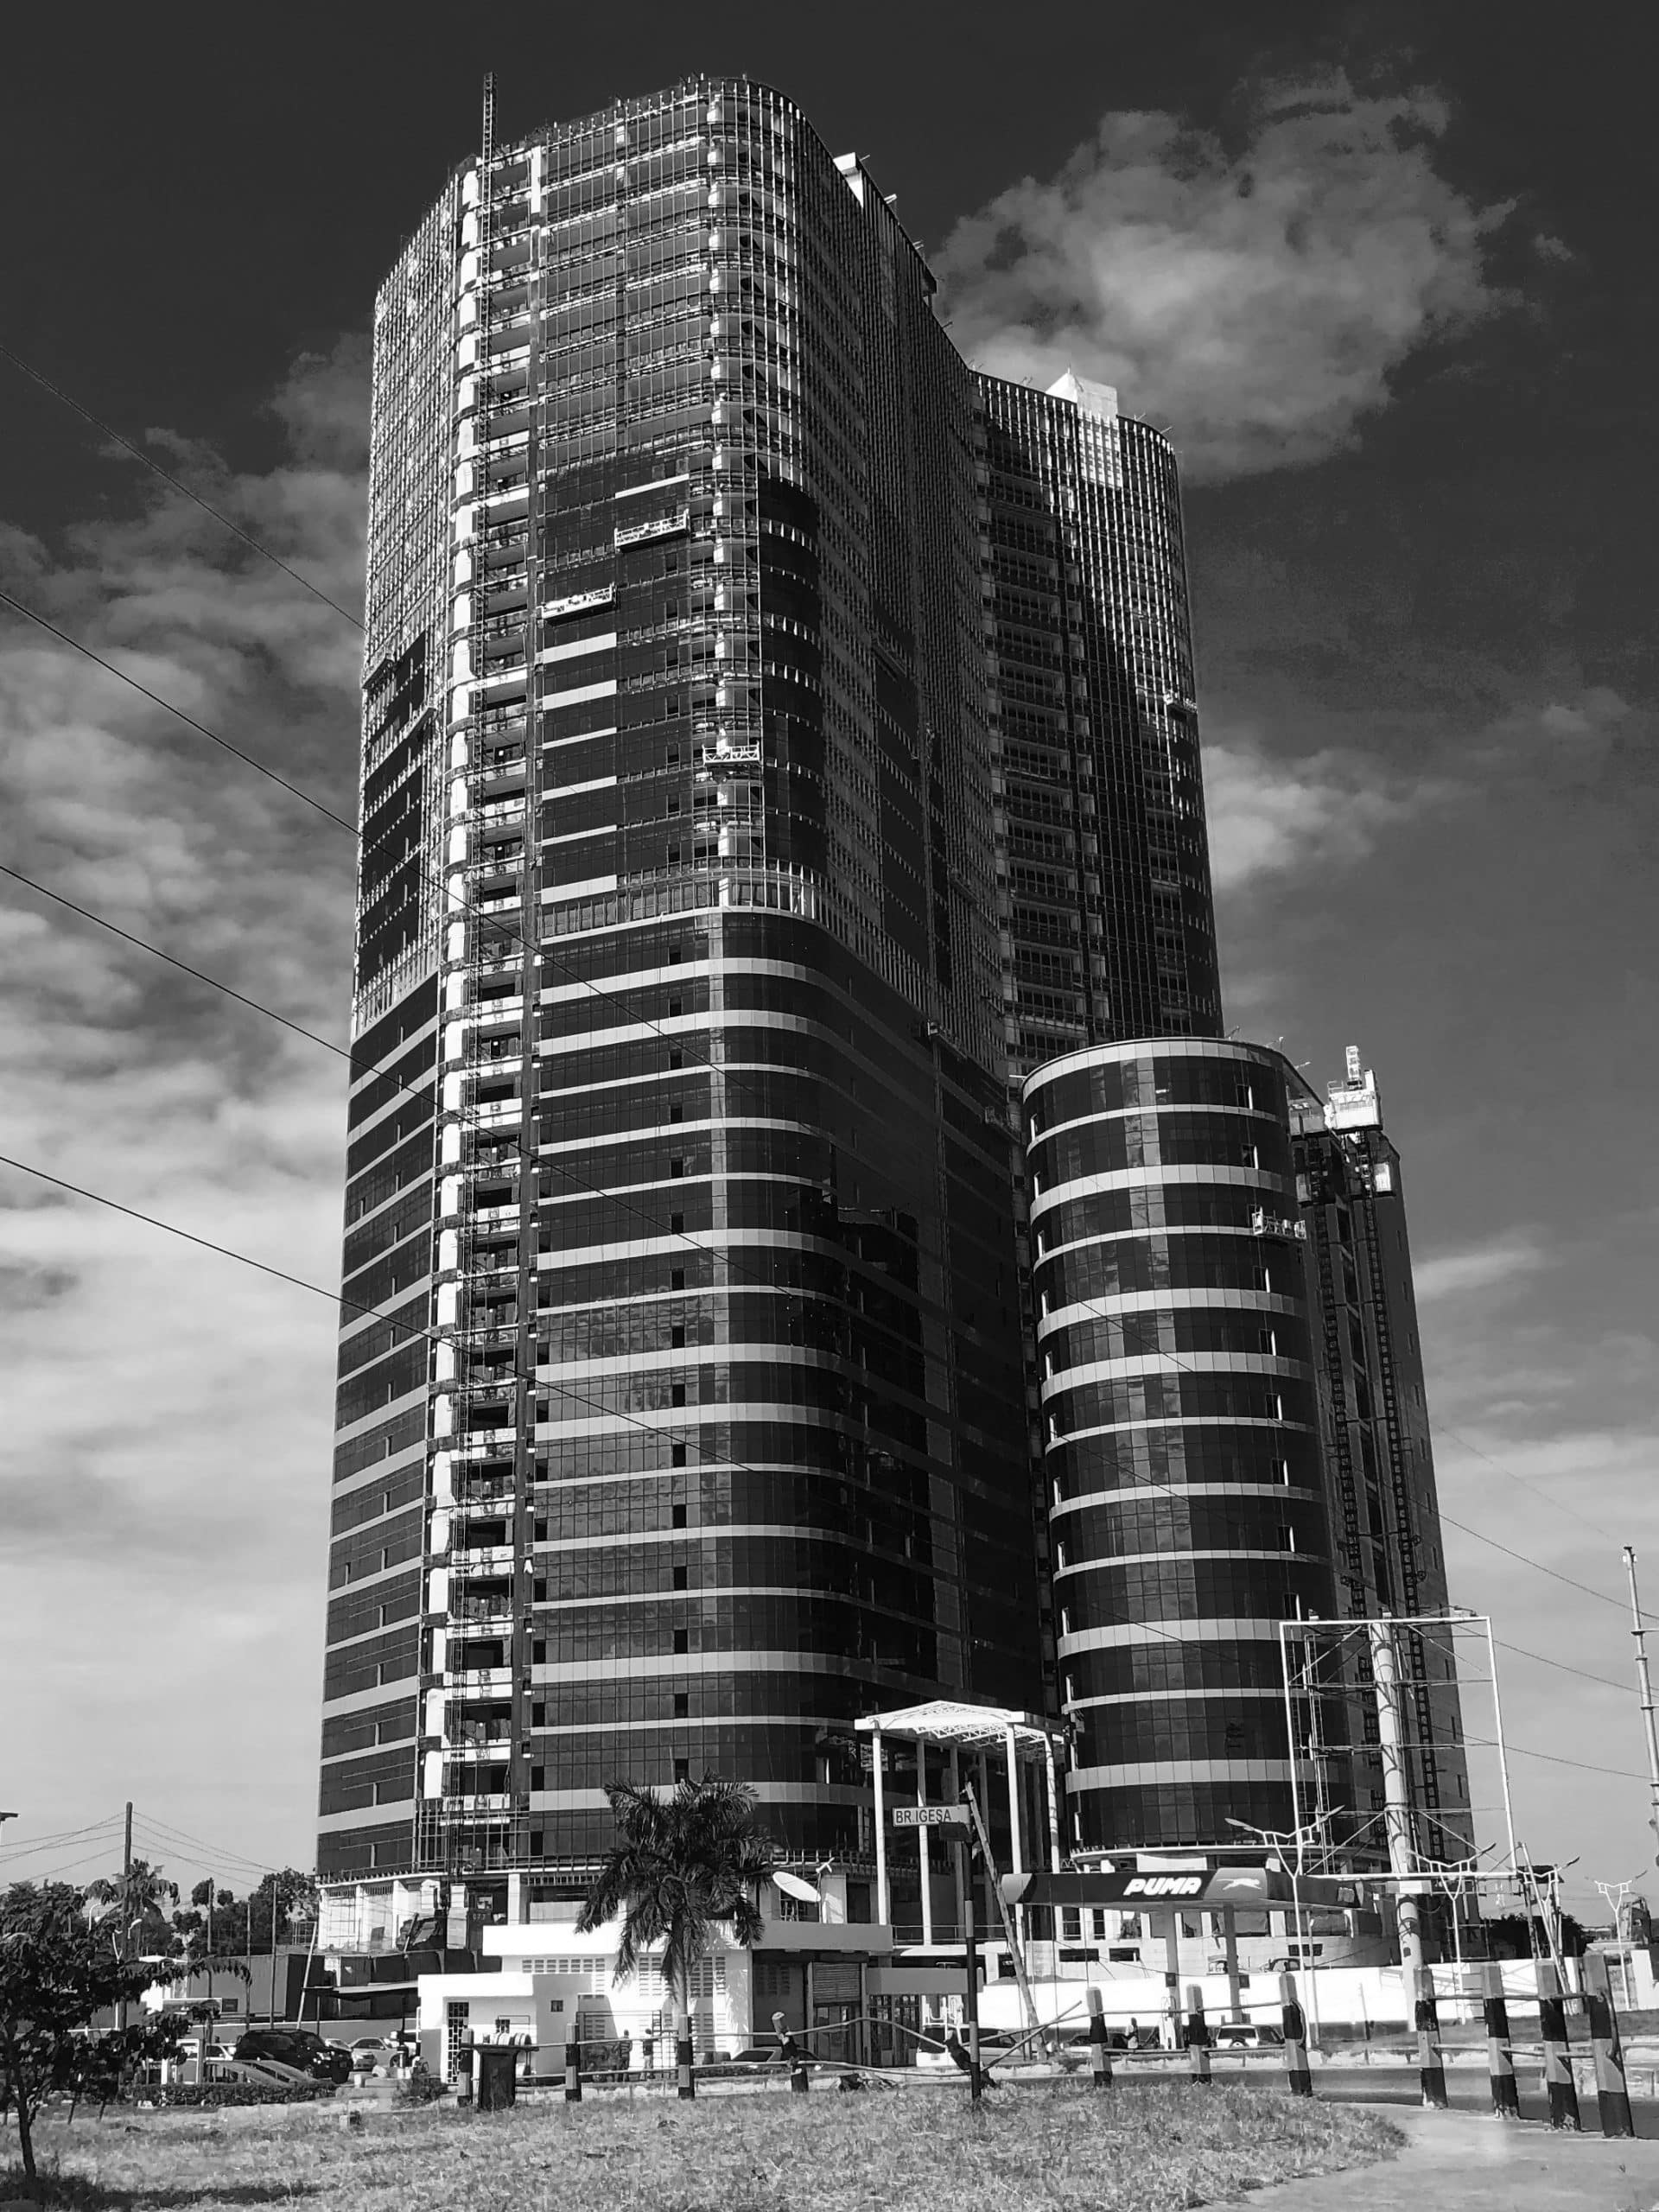 The PPF Tower